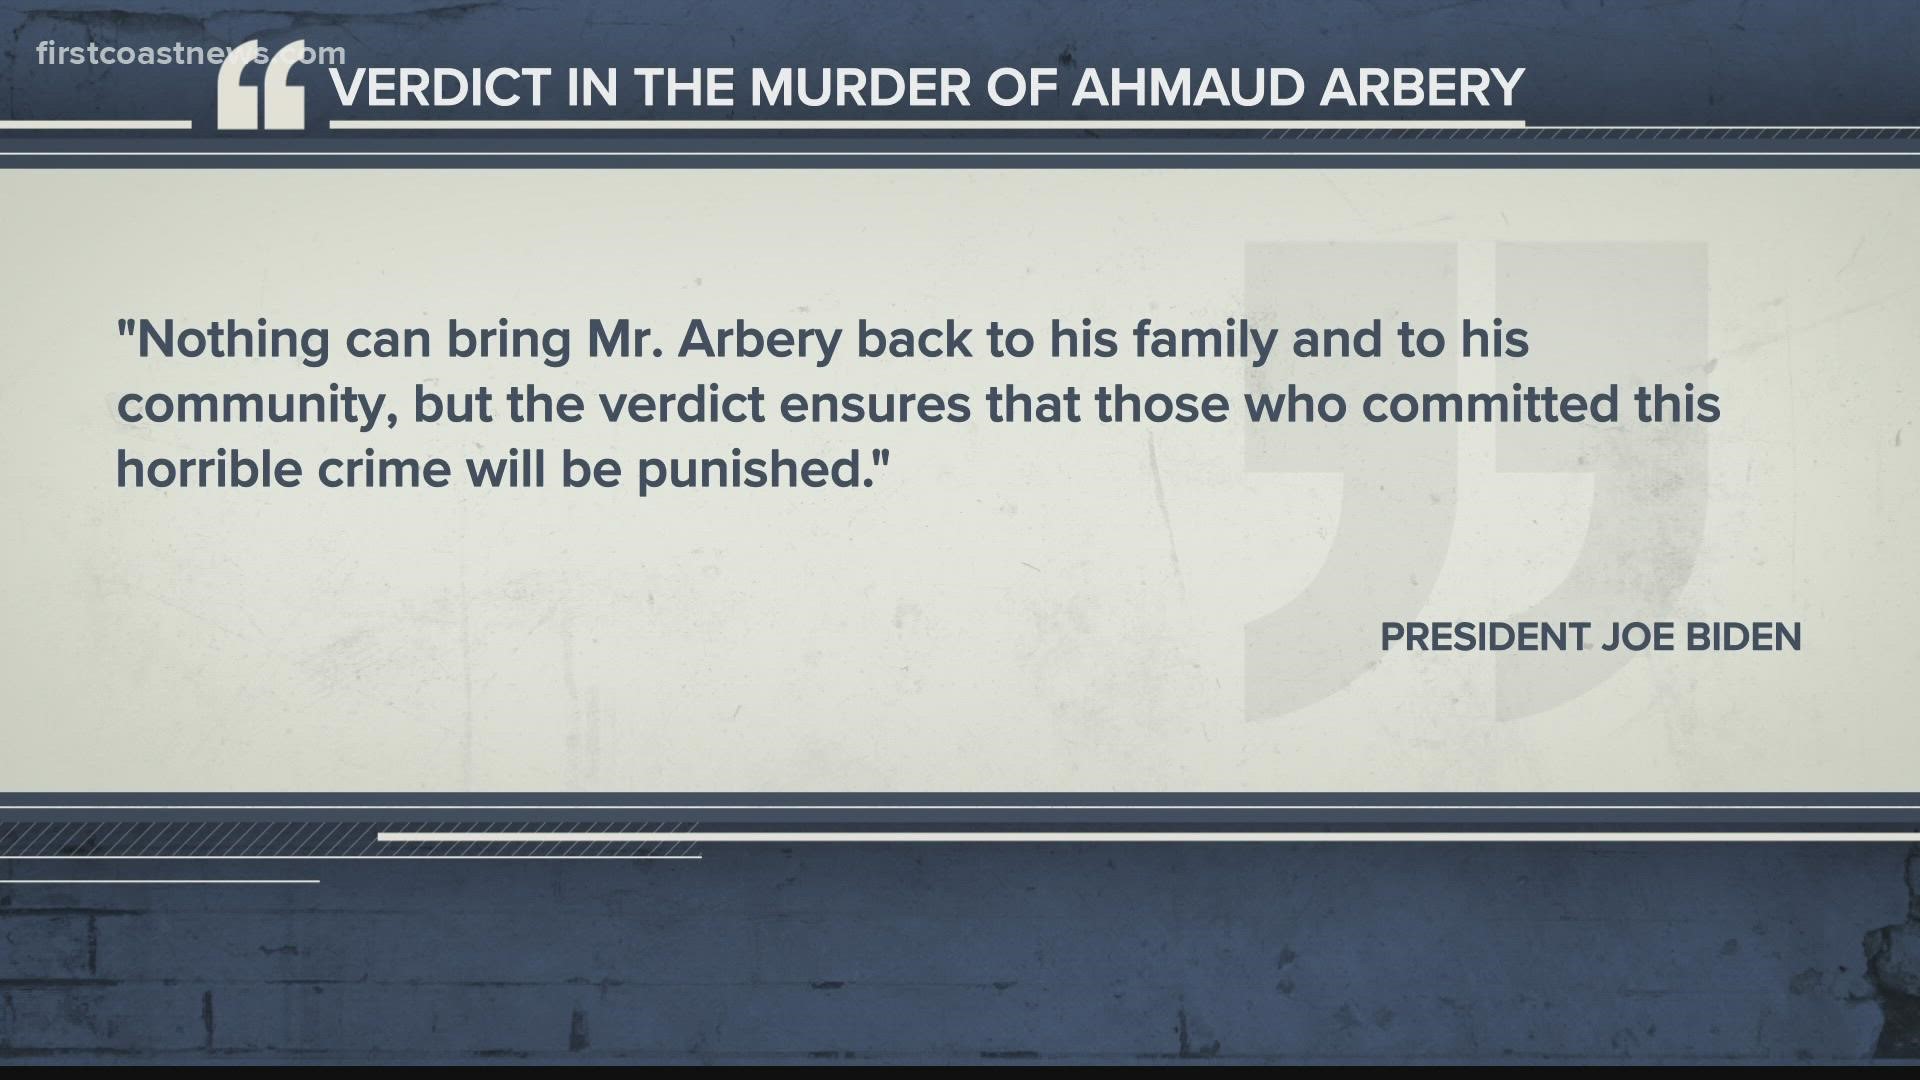 "Nothing can bring Mr. Arbery back to his family and to his community, but the verdict ensures that those who committed this horrible crime will be punished."